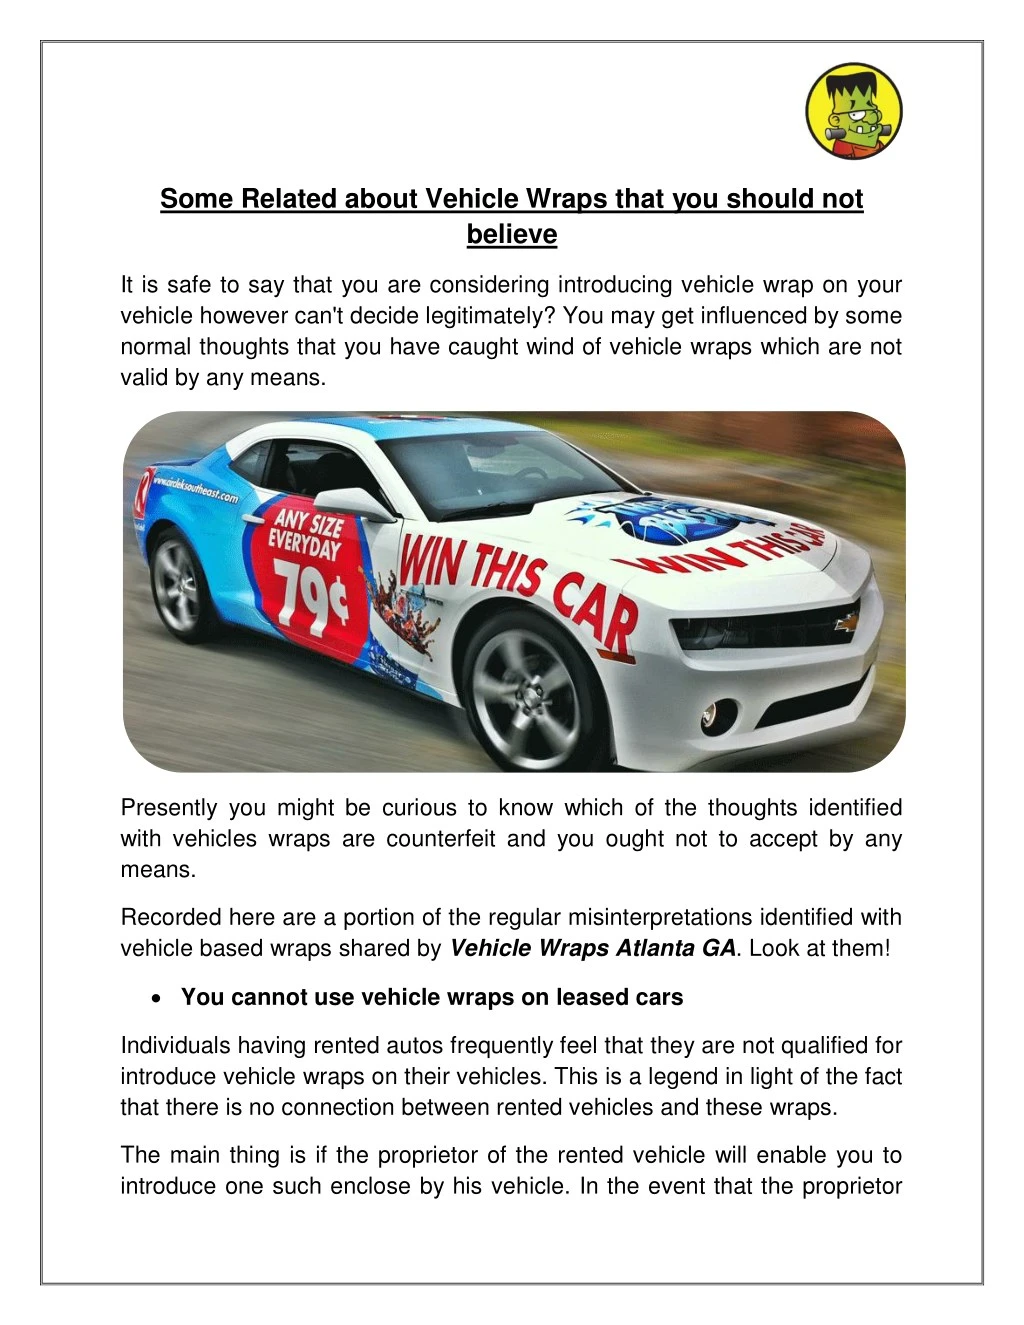 some related about vehicle wraps that you should